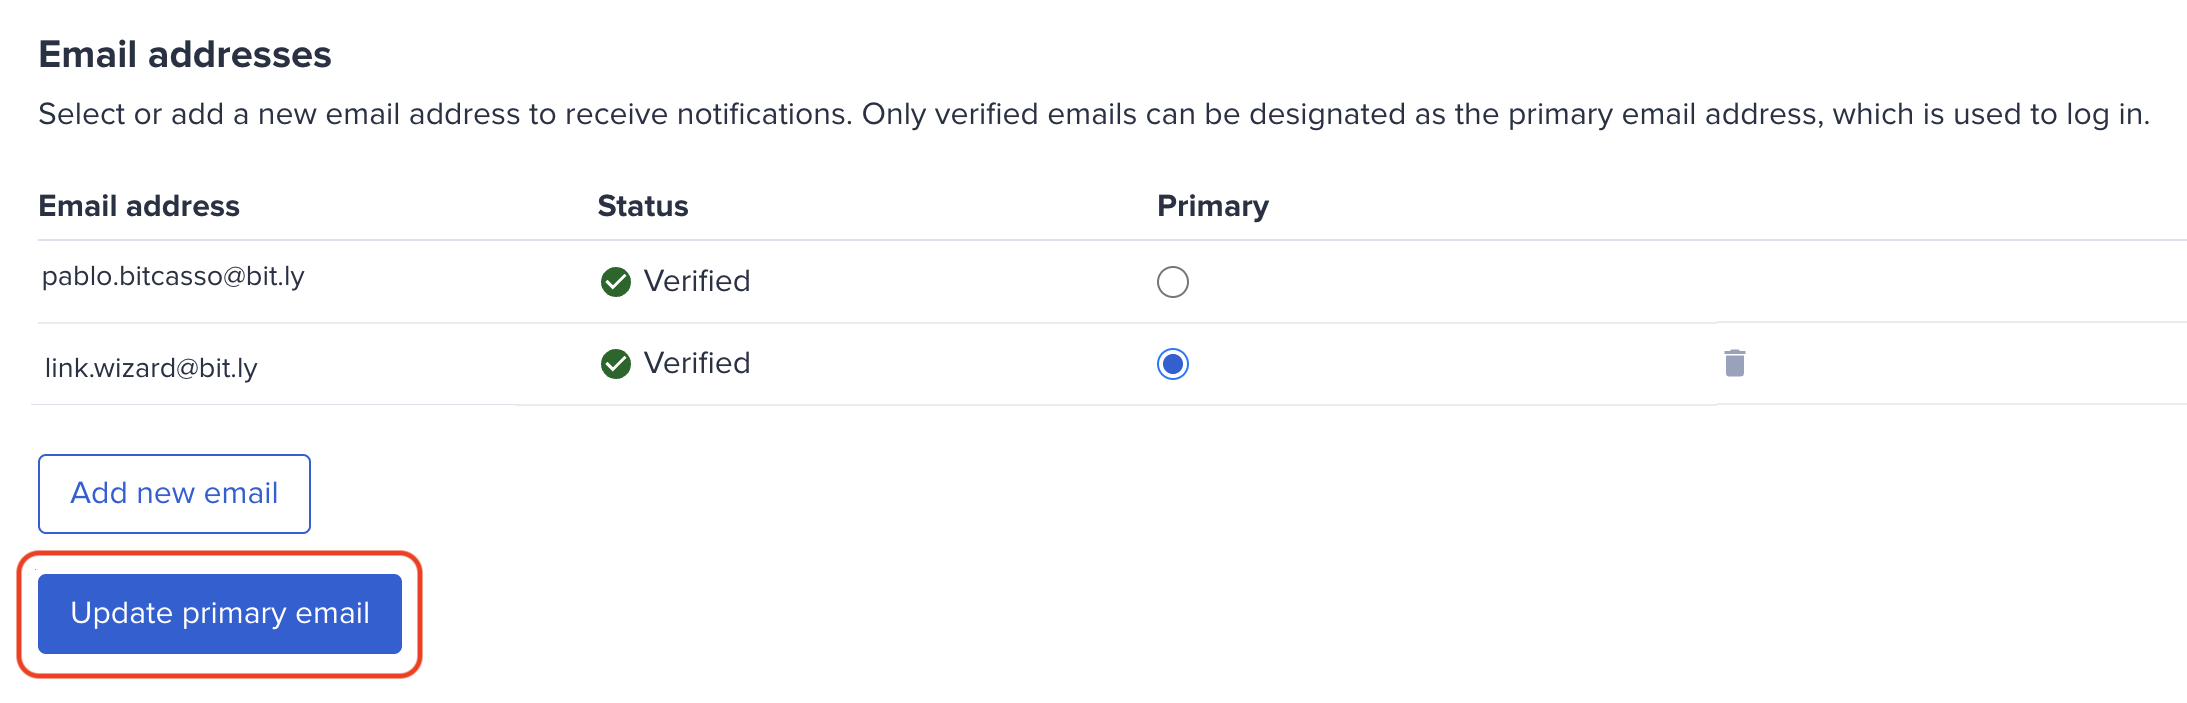 Bitly_settings_update_primary_email.png